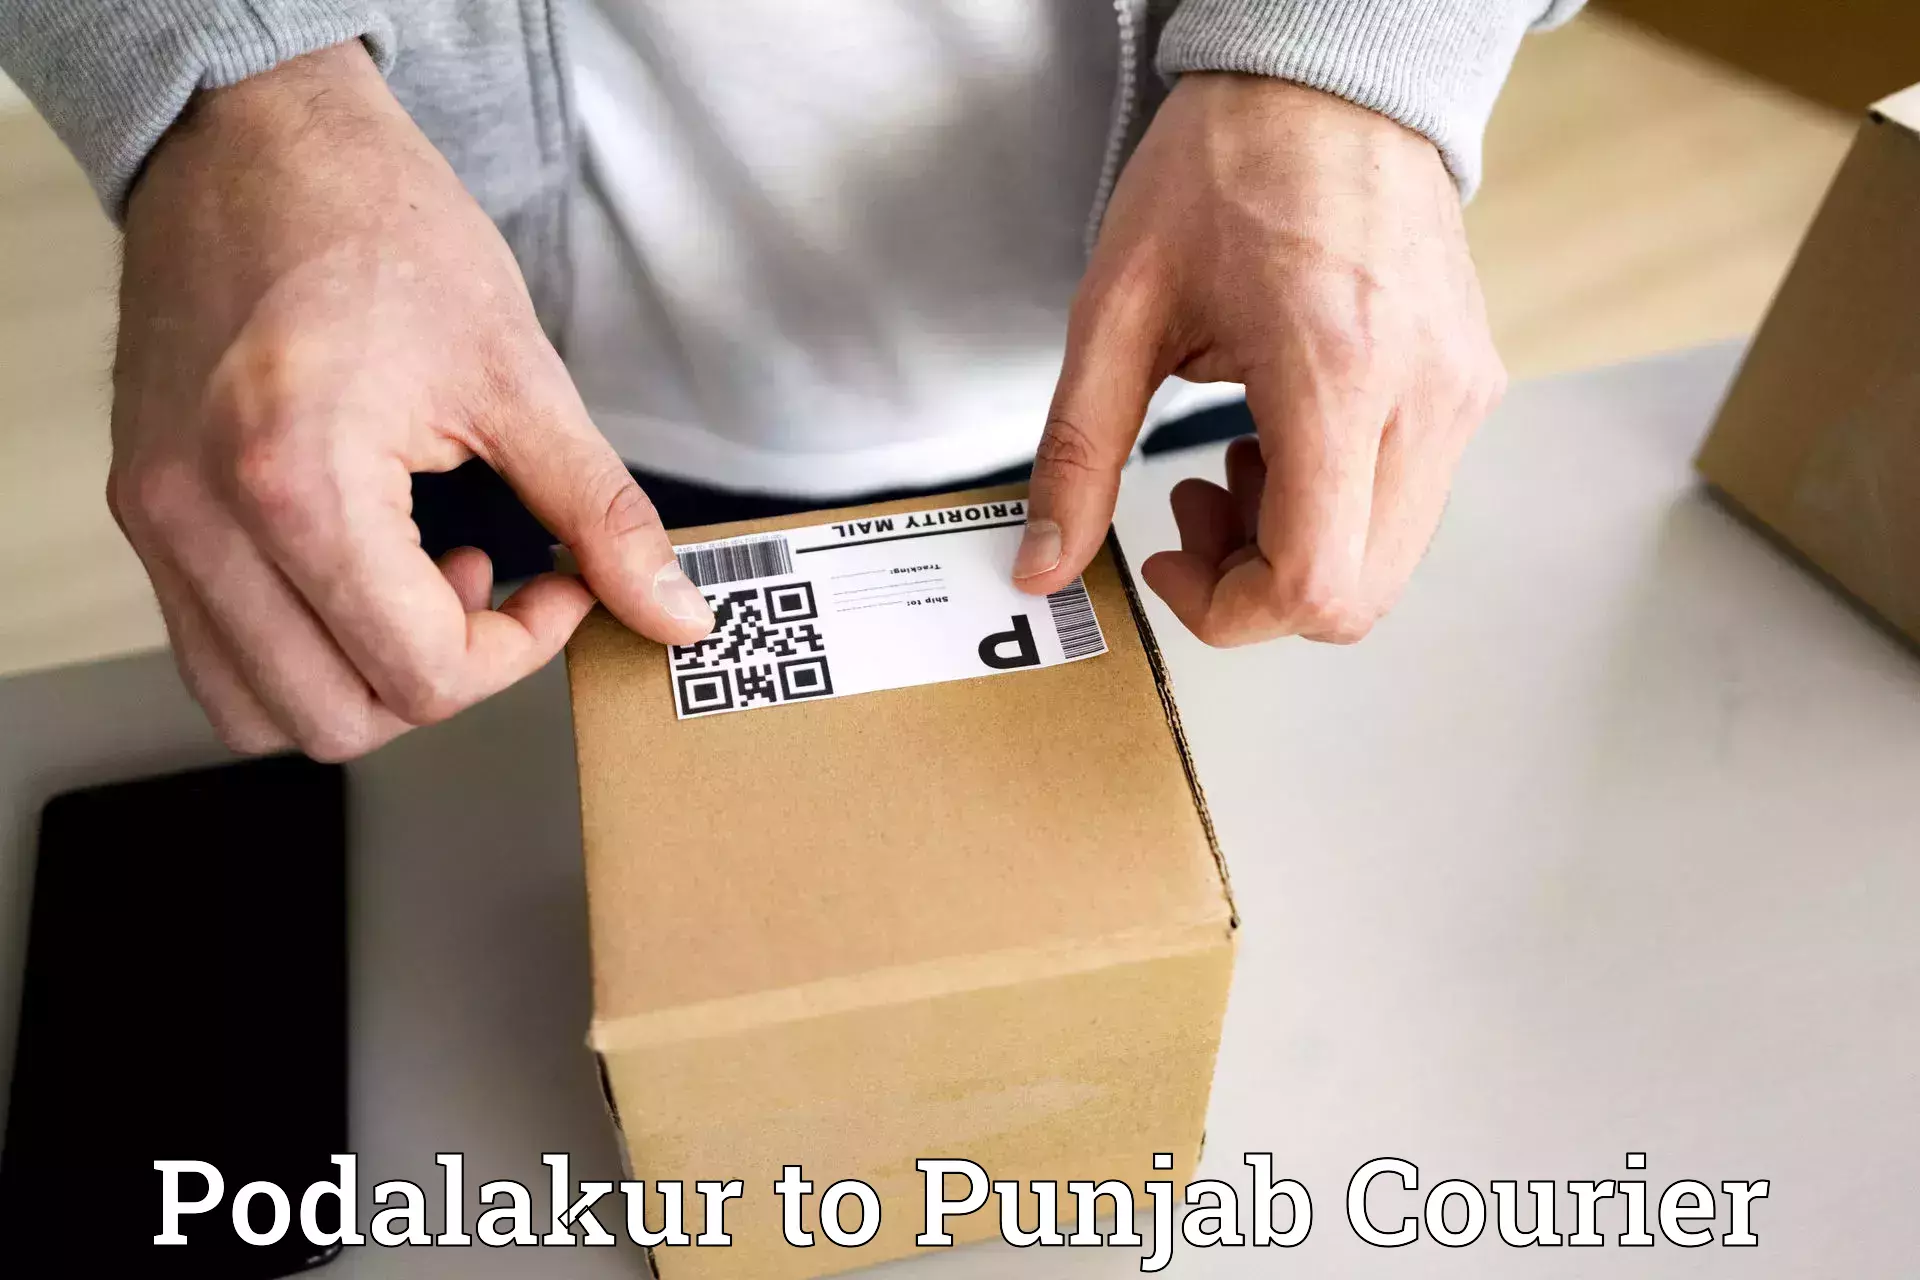 User-friendly delivery service Podalakur to Sirhind Fatehgarh